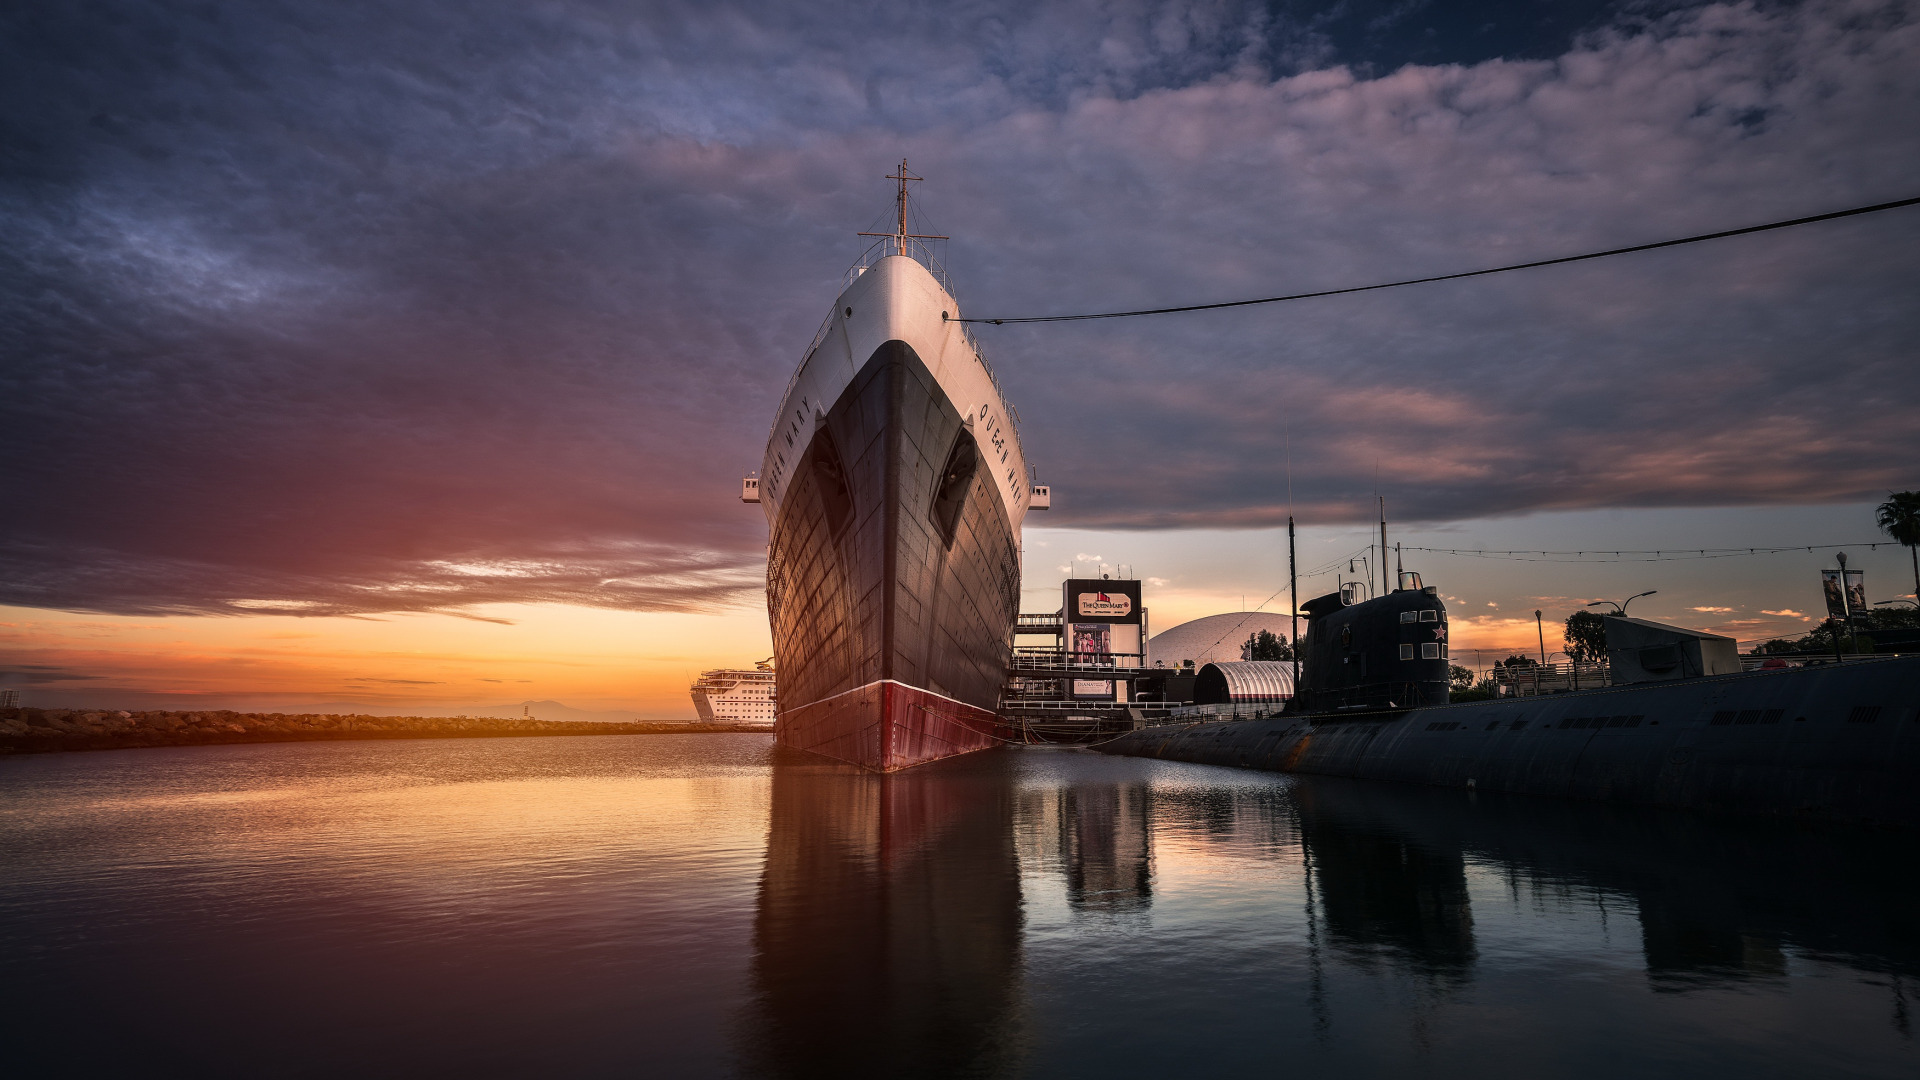 Ship Water Clouds Harbor Ropes Sea Sunset Hangar Submarine Reflection Queen Mary 2 Long Beach 1920x1080